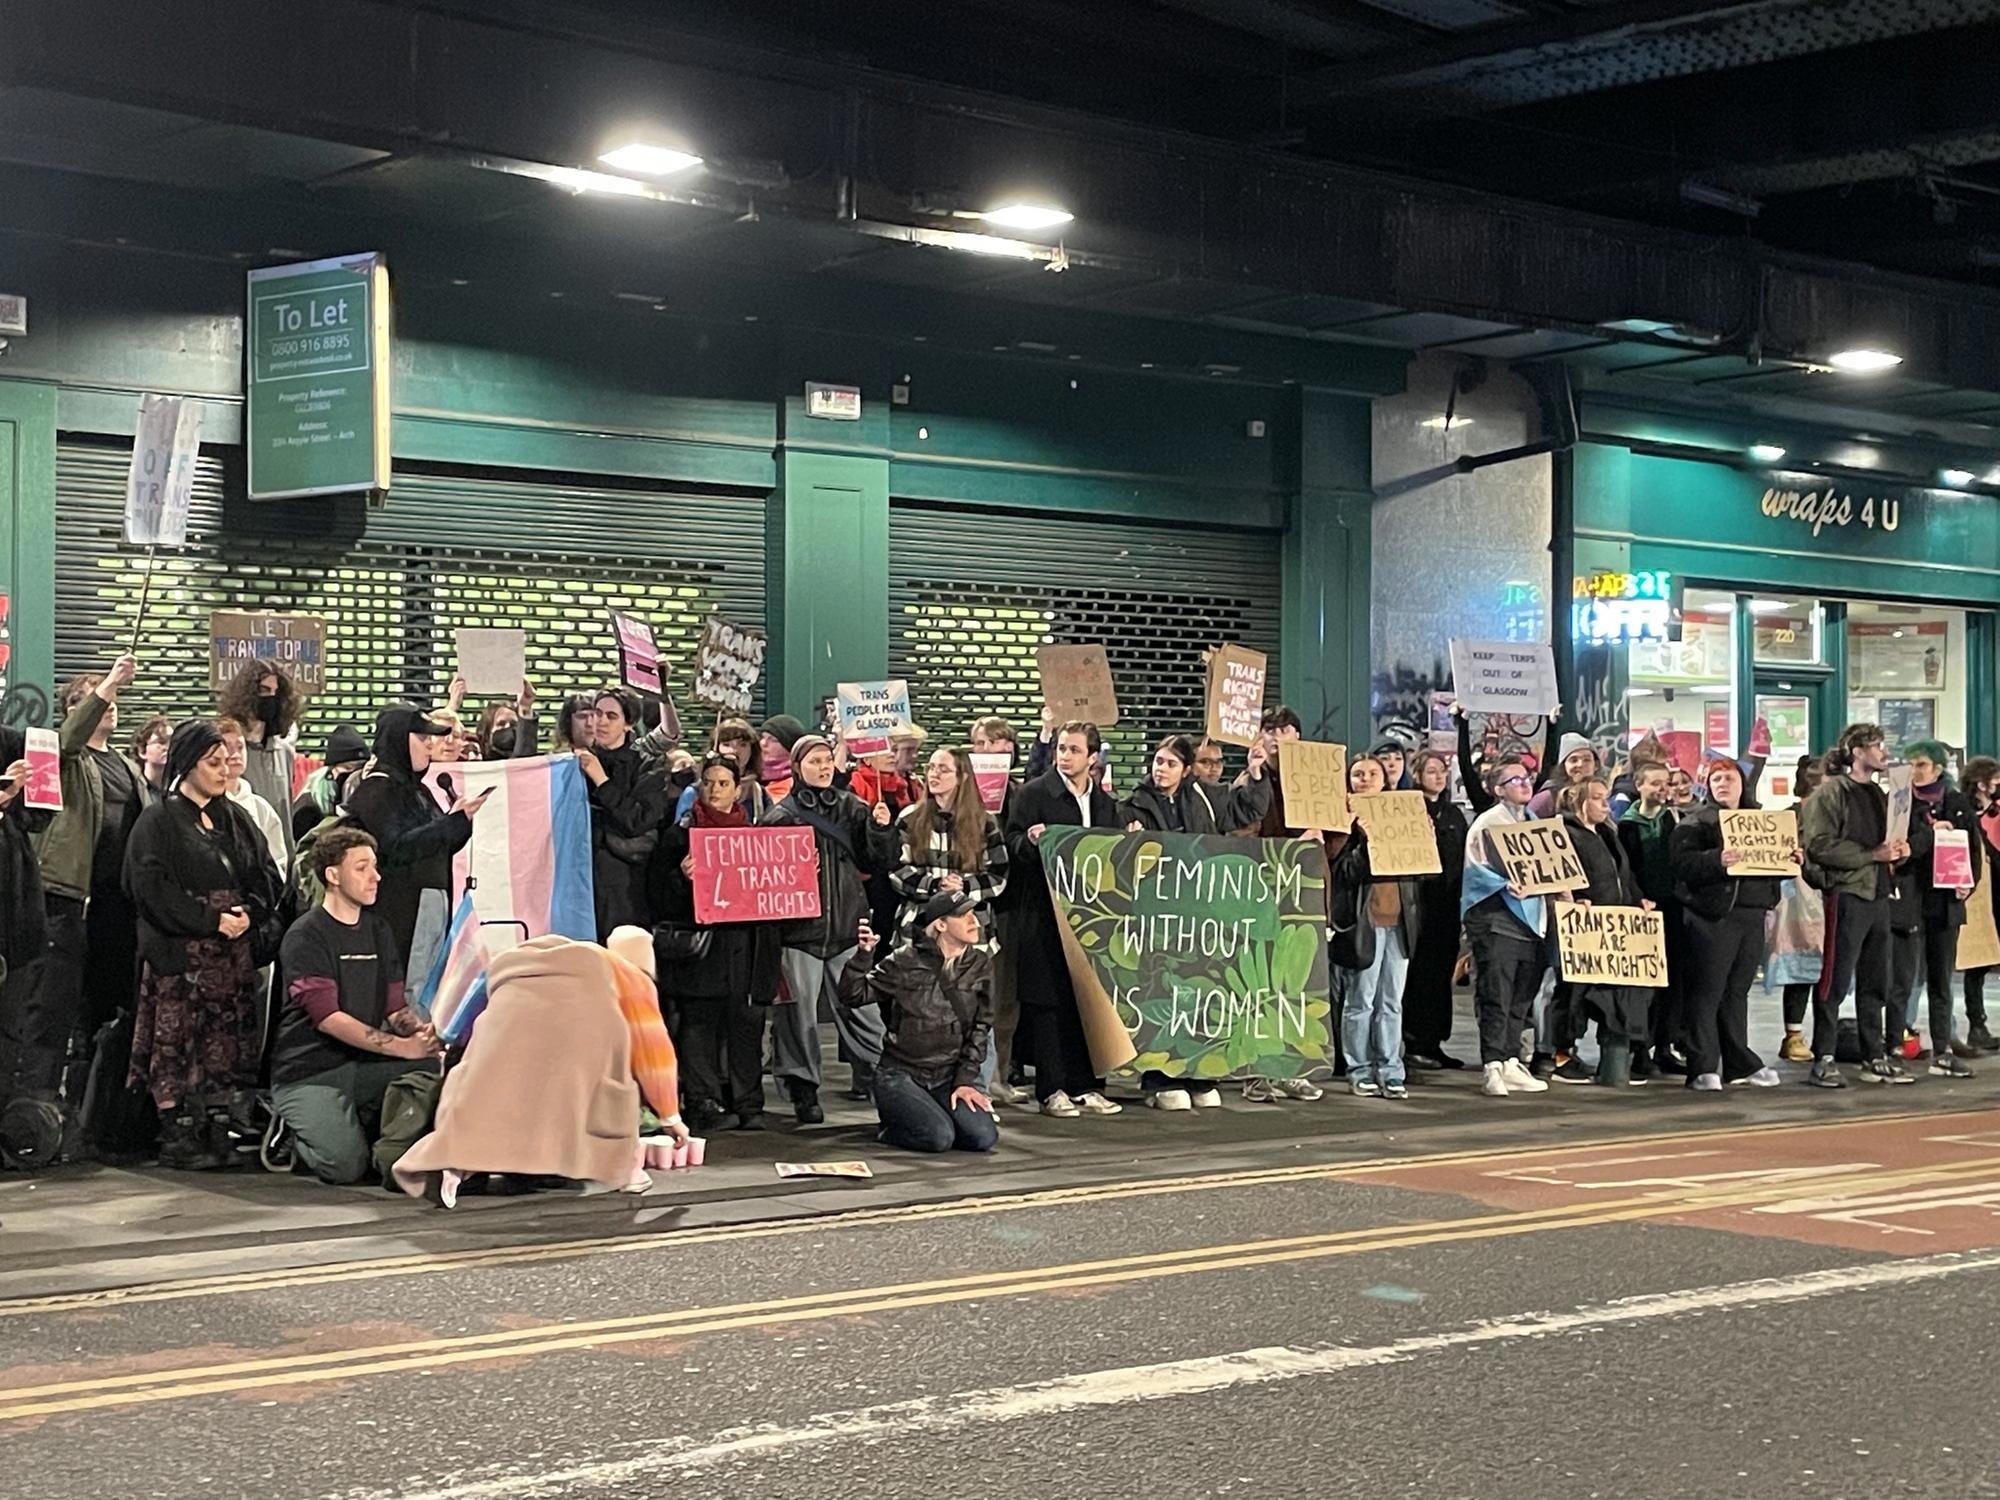 Trans activists stage protest outside FiLiA feminist conference in Glasgow